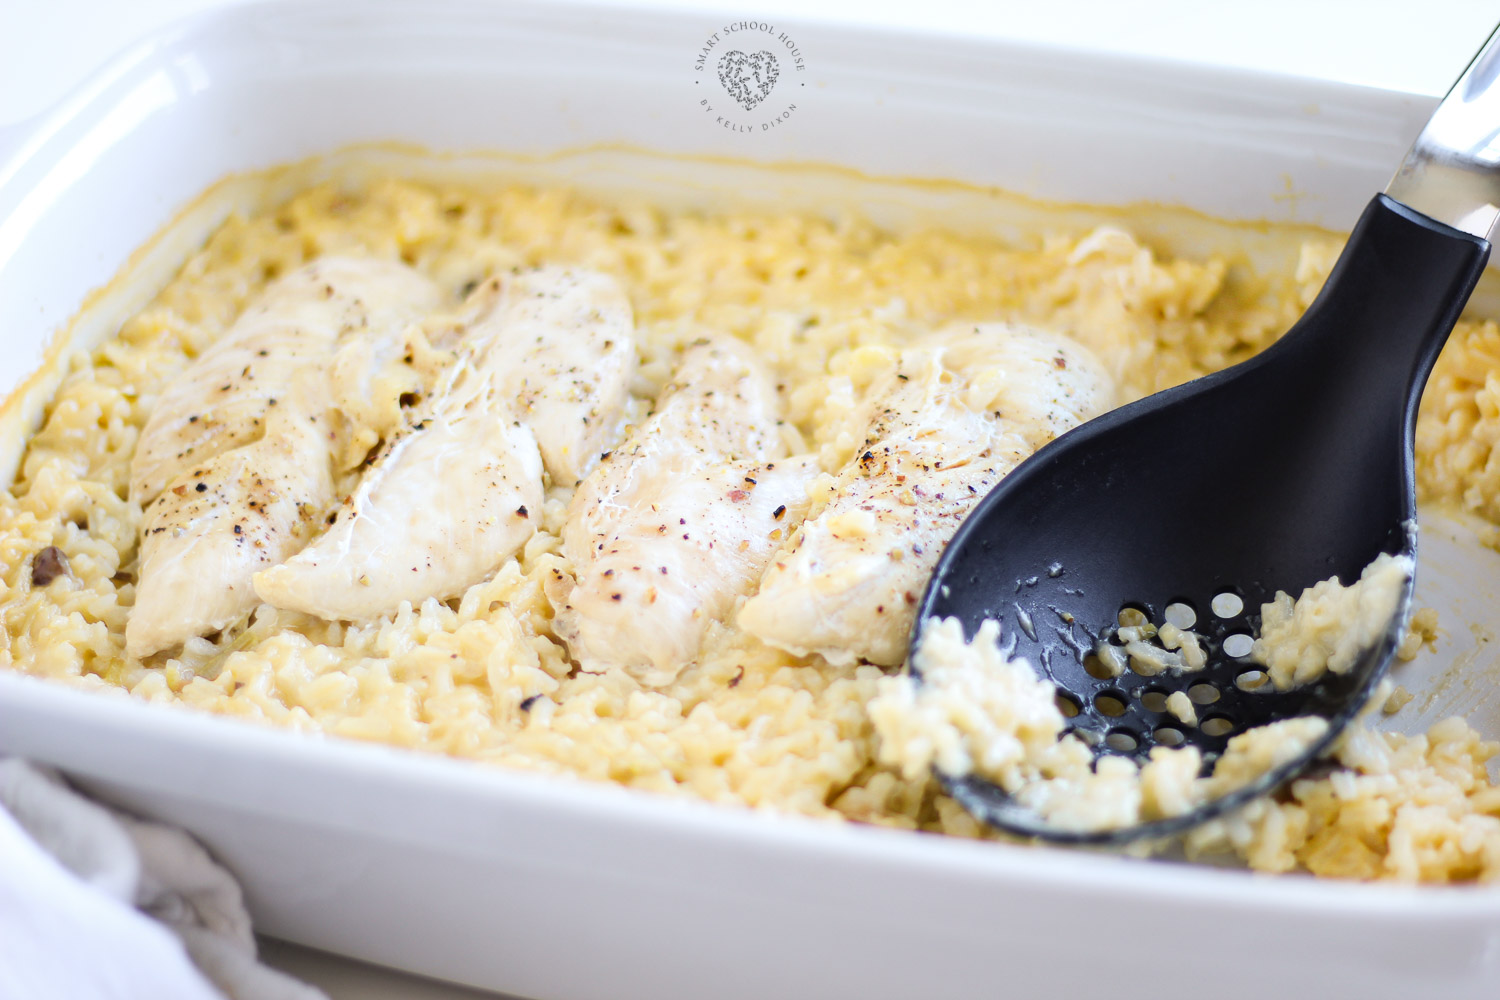 This simple Chicken and Rice Casserole only takes a few ingredients and your oven does most of the work:) It's a wonderful tried and true recipe that’s big on taste and comfort and so easy to make. If you need, like, or prefer easy recipes, seriously, this is THE BEST!!! 100% picky eater approved, too.